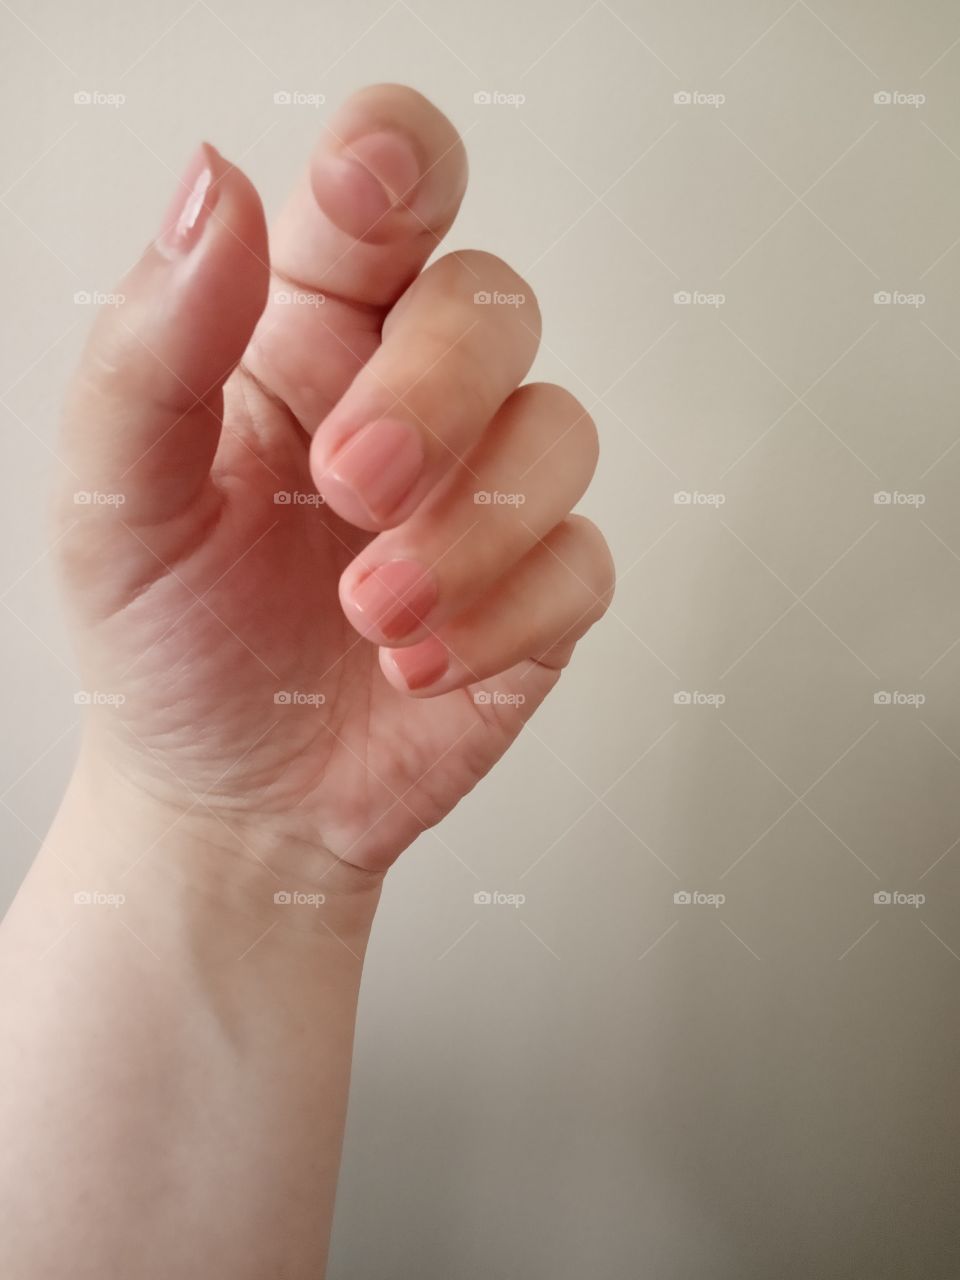 women hand with short manicure nails, with nude nail polish.